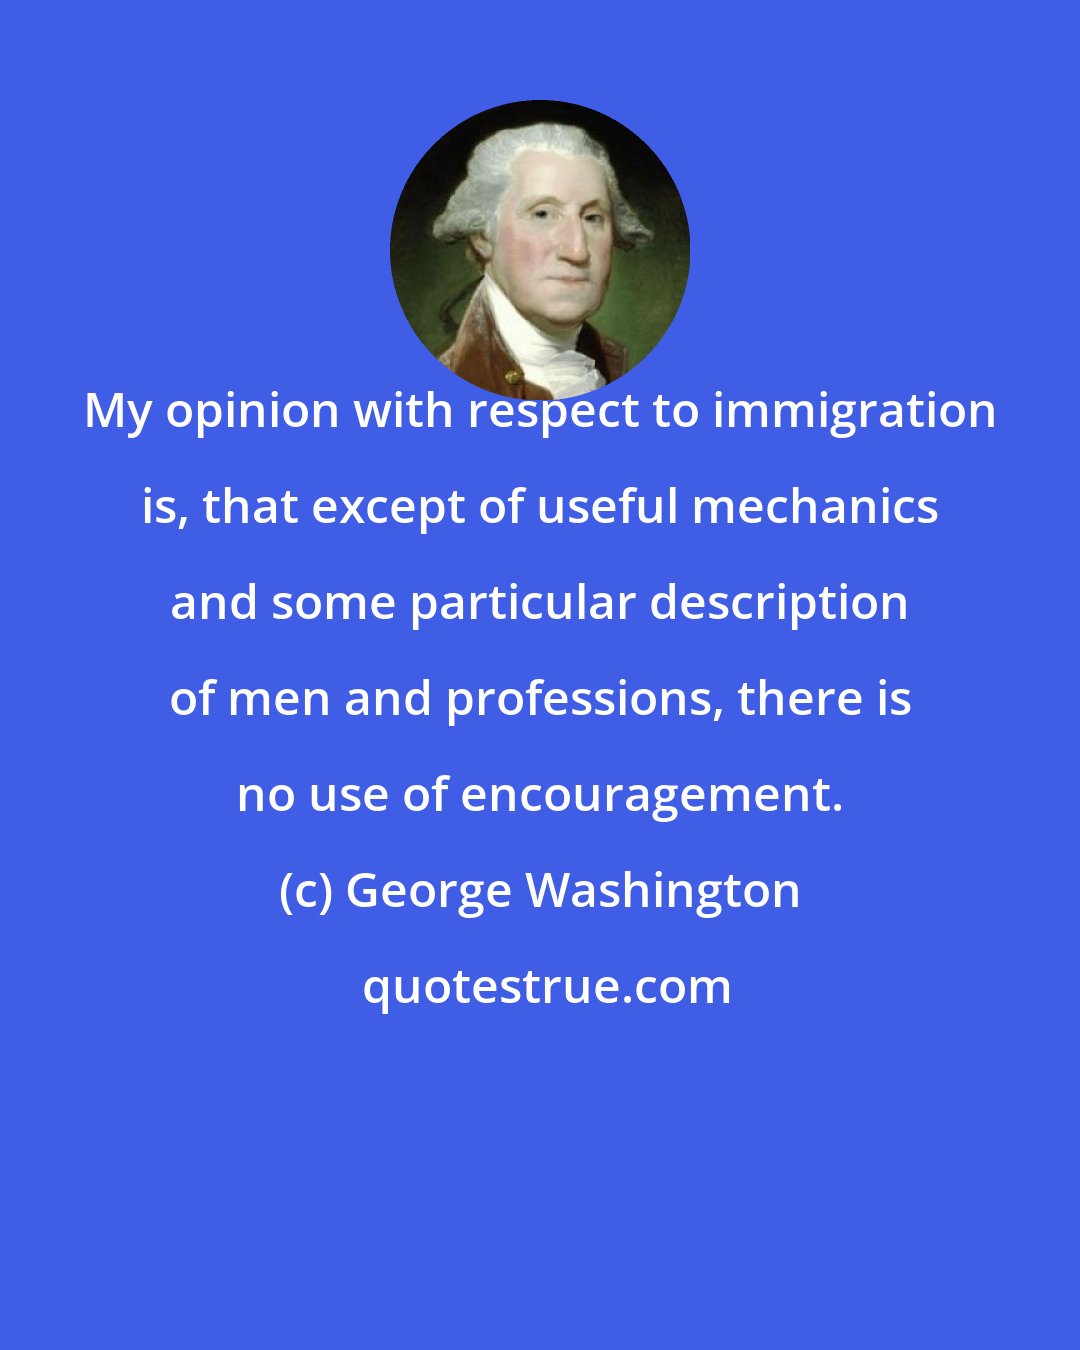 George Washington: My opinion with respect to immigration is, that except of useful mechanics and some particular description of men and professions, there is no use of encouragement.